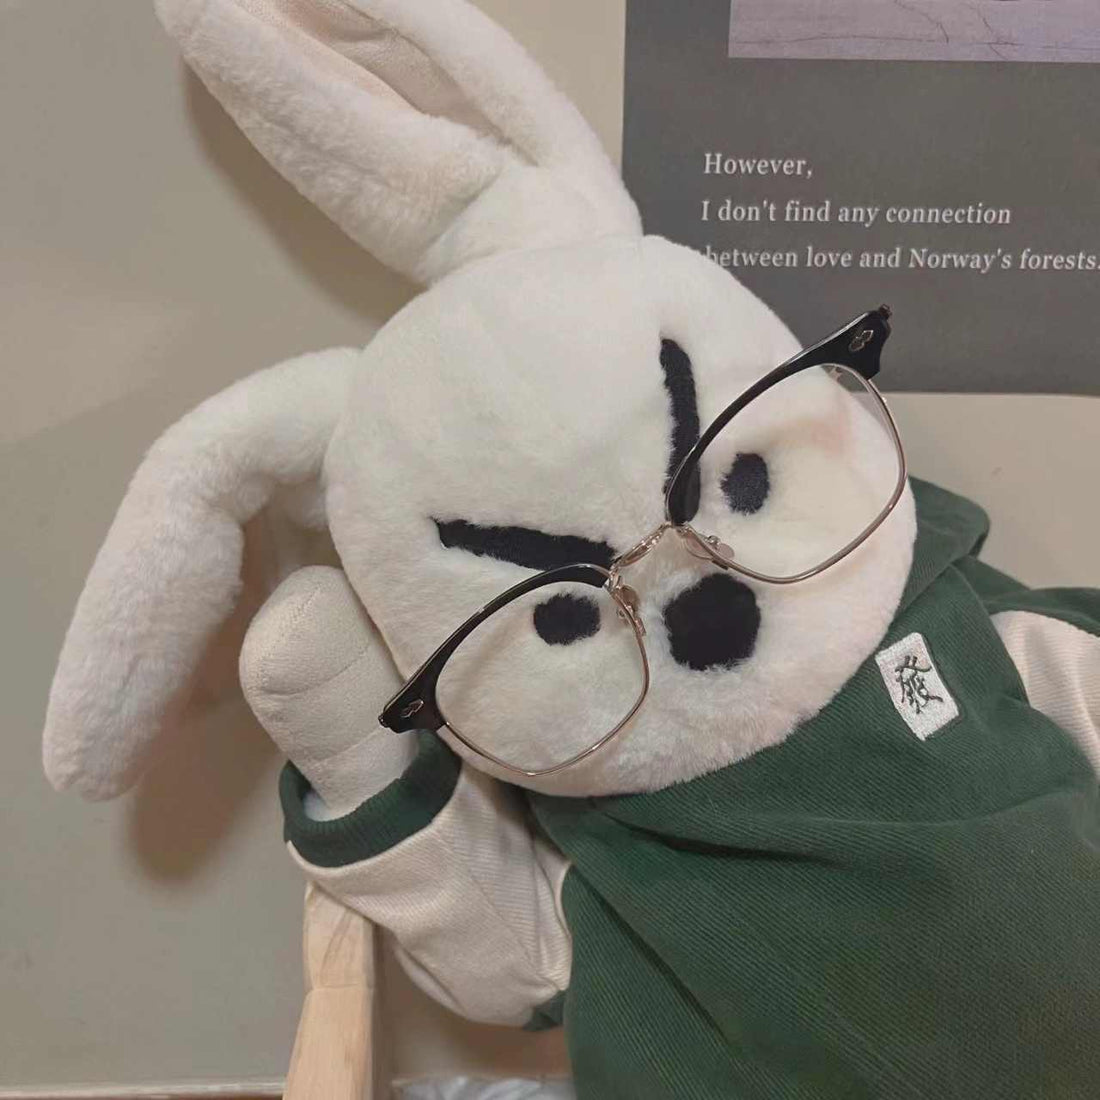 Why is Fearless Rabbit so angry?